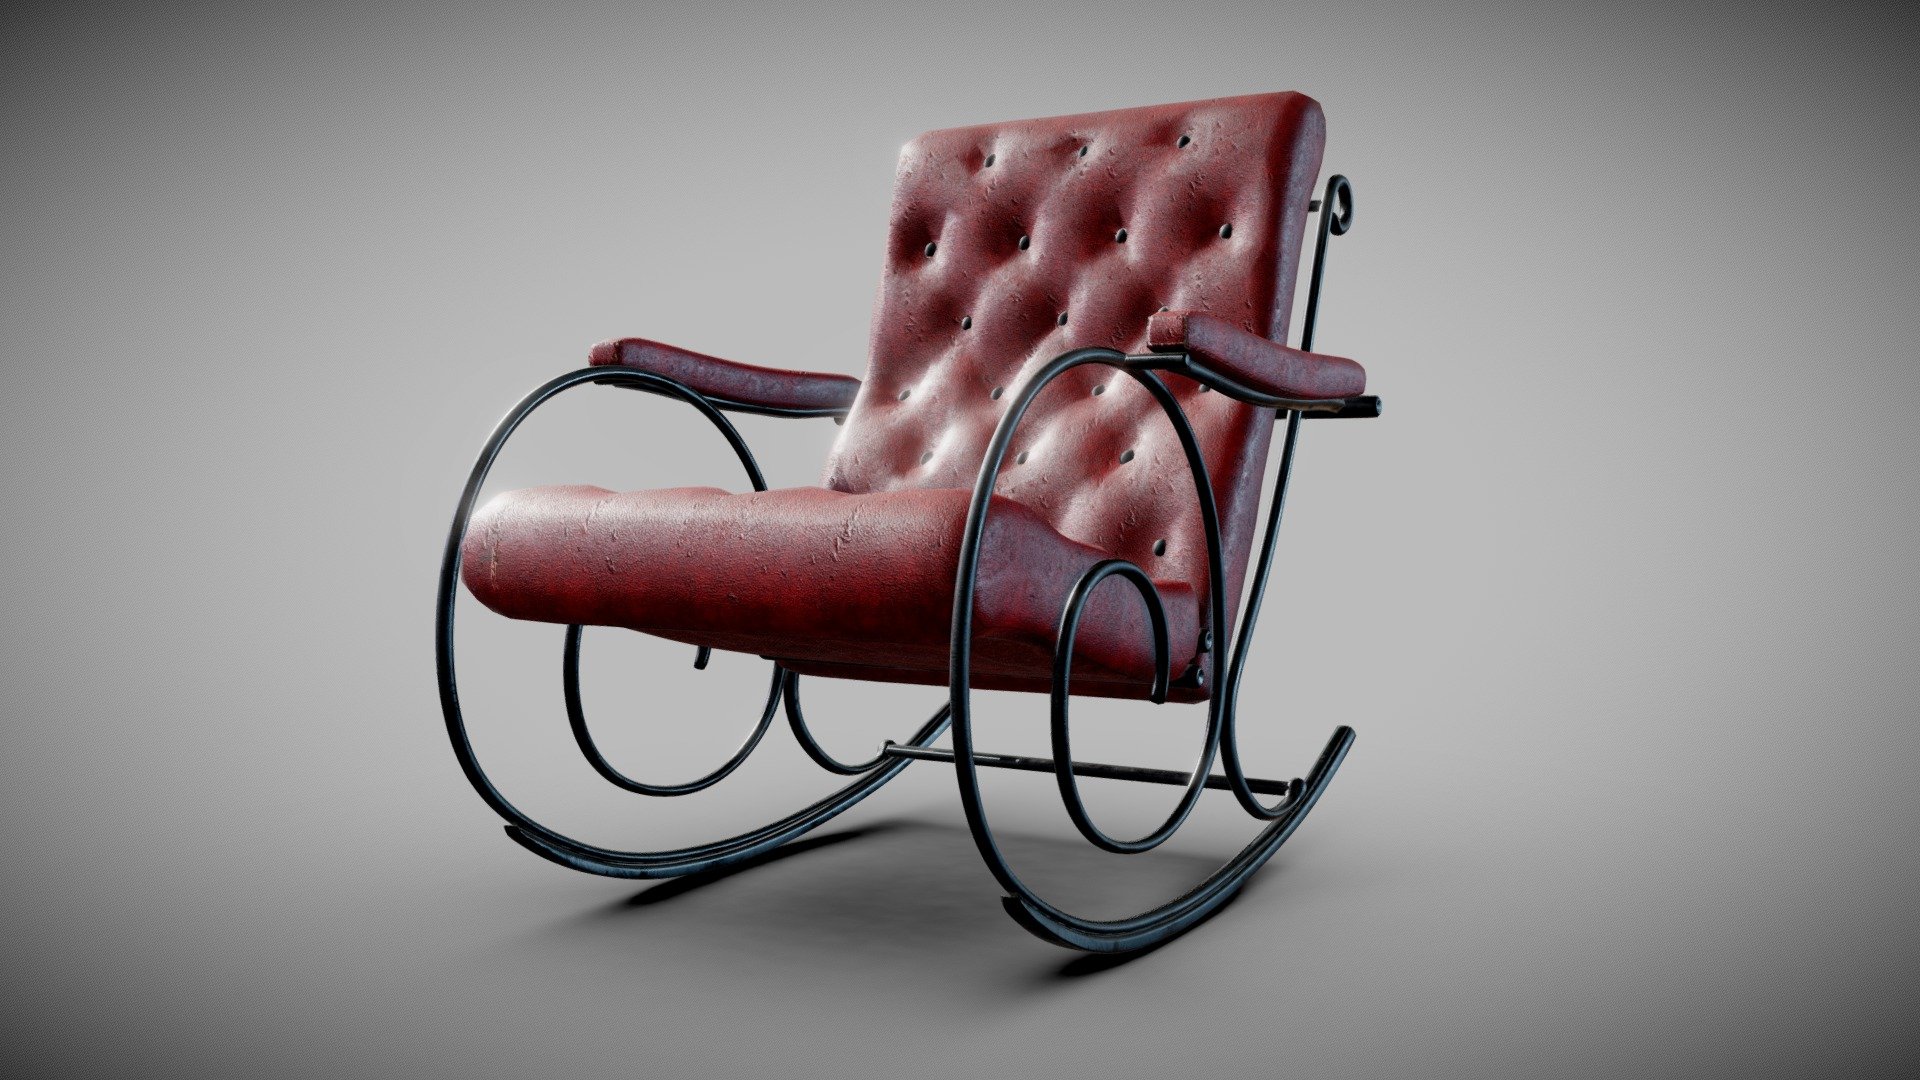 Modeled in Maya and Zbrush, Materials and textures created in Substance Painter 3d model